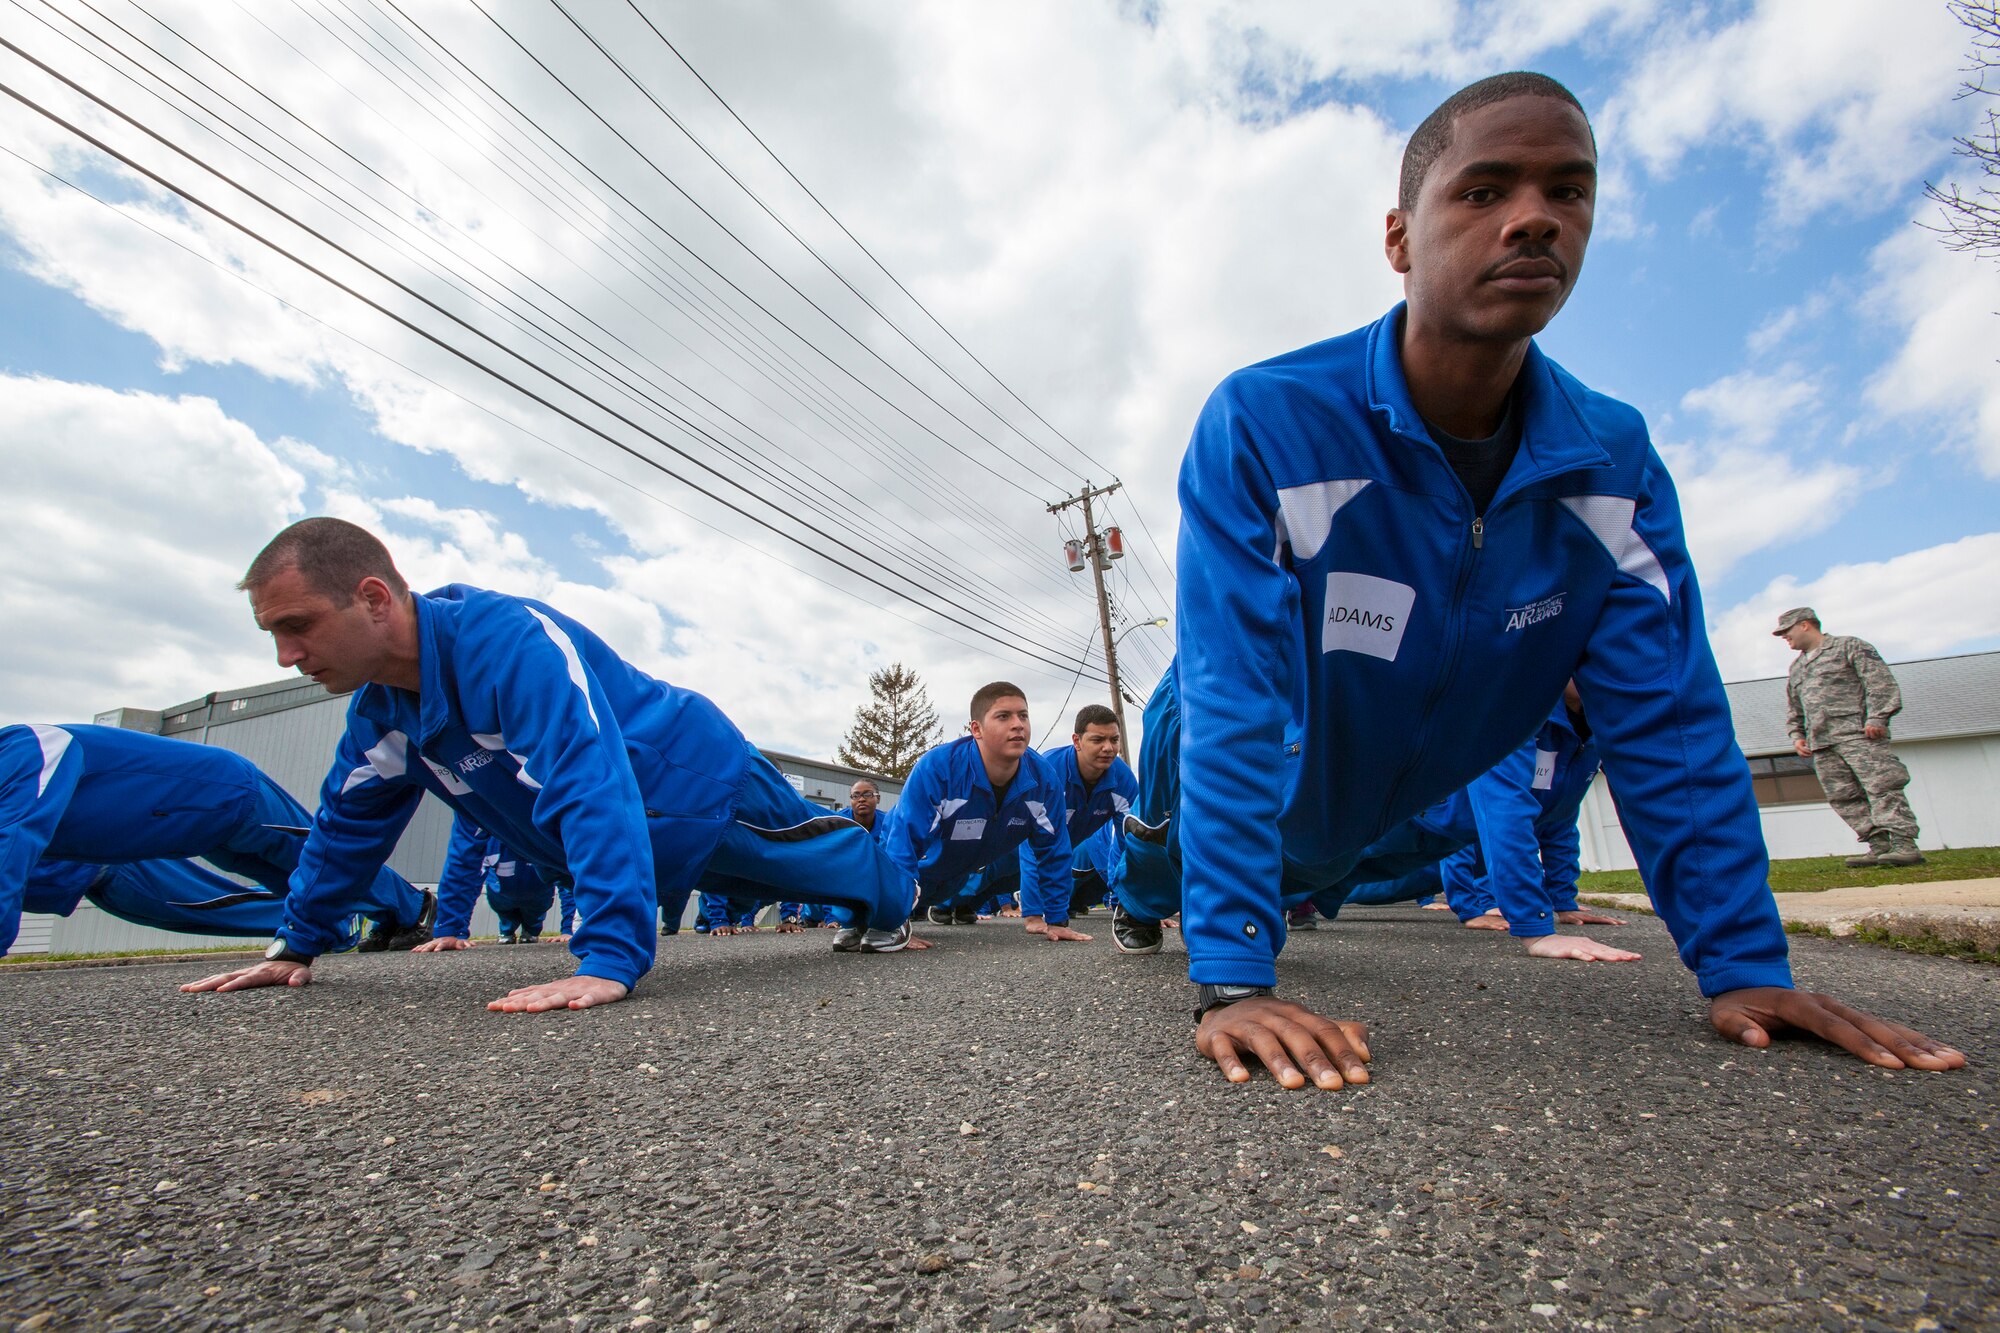 John J. Adams, right, 108th Wing Student Flight, practices his push-ups April 13, 2013, at the National Guard Training Center in Sea Girt, N.J. (U.S. Air National Guard photo by Master Sgt. Mark C. Olsen/Released)